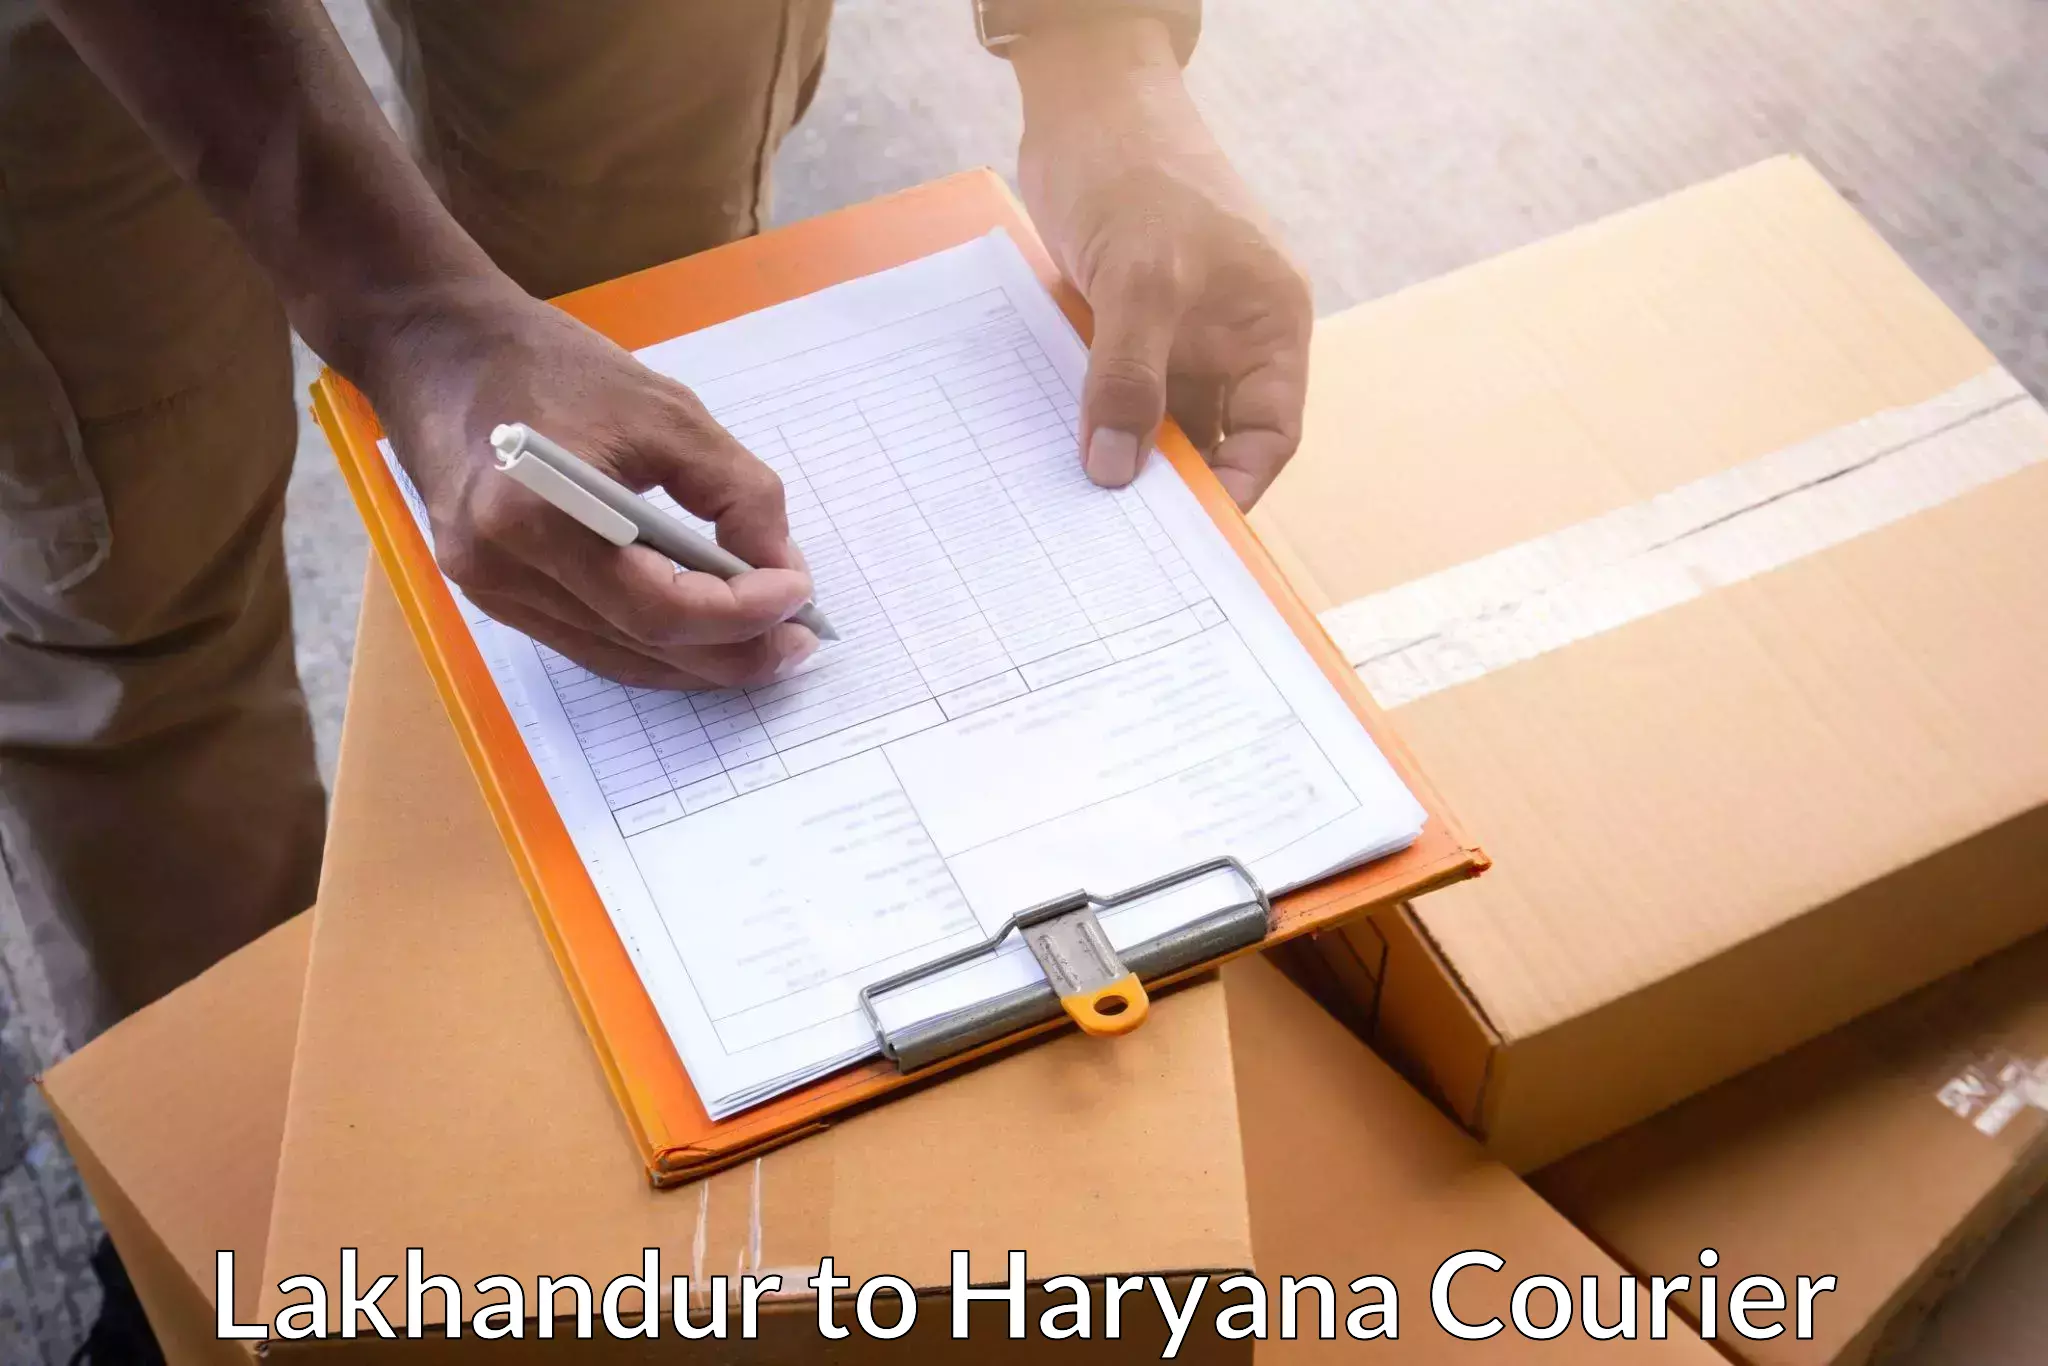 Parcel delivery Lakhandur to Chaudhary Charan Singh Haryana Agricultural University Hisar